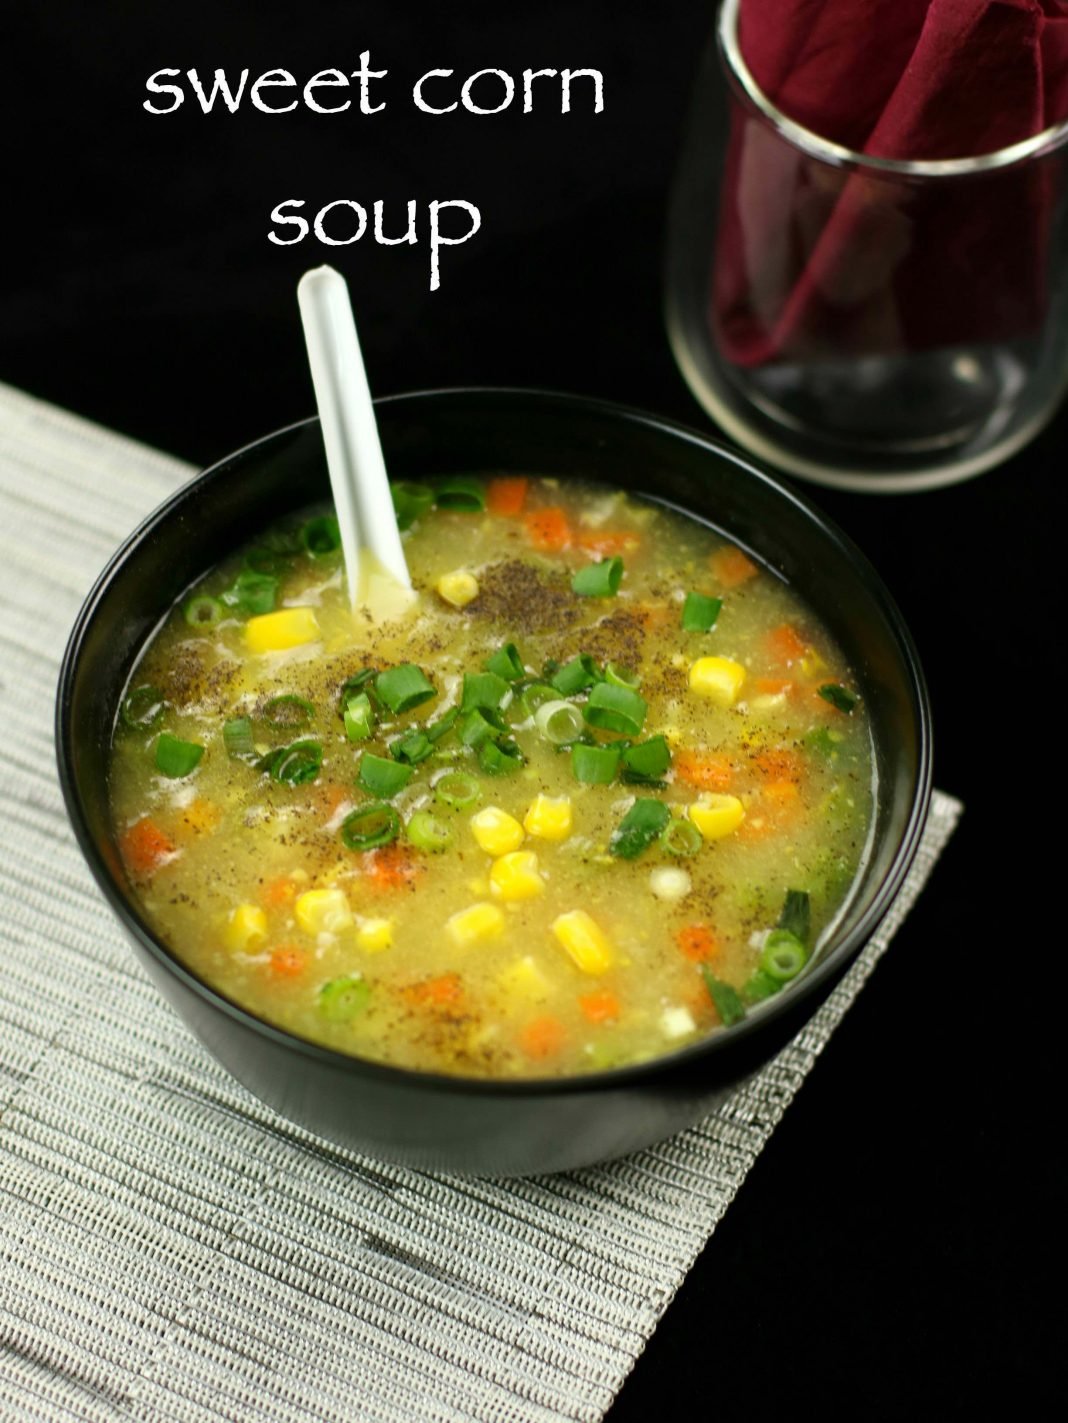 sweet corn soup recipe | sweet corn and vegetable soup recipe